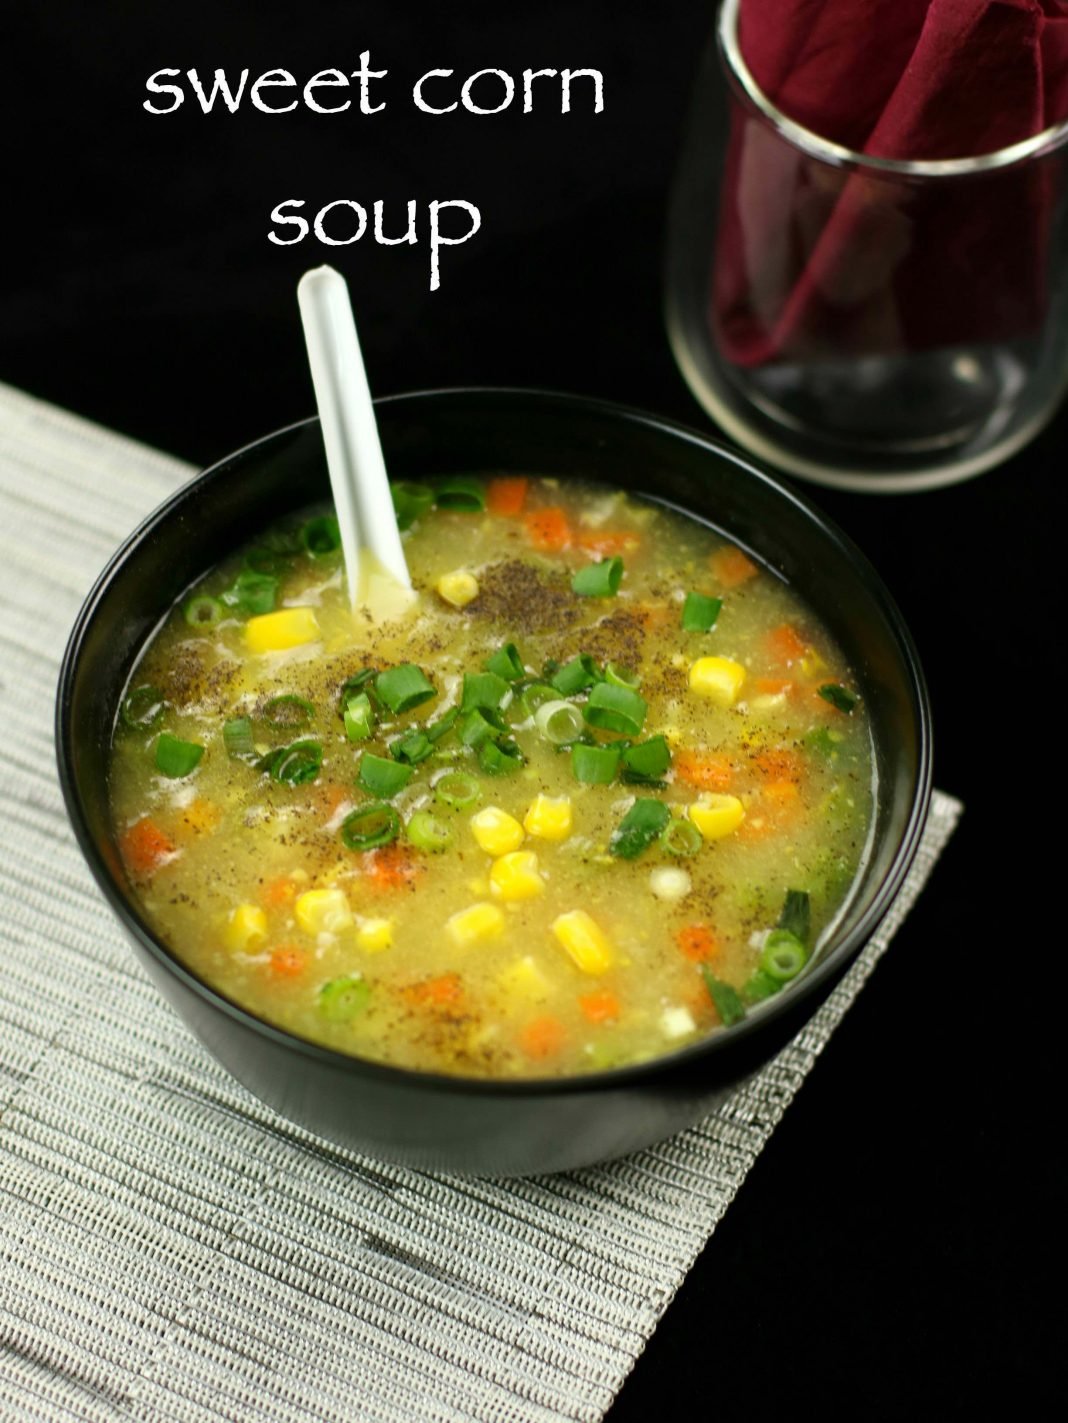 sweet corn soup recipe | sweet corn and vegetable soup recipe